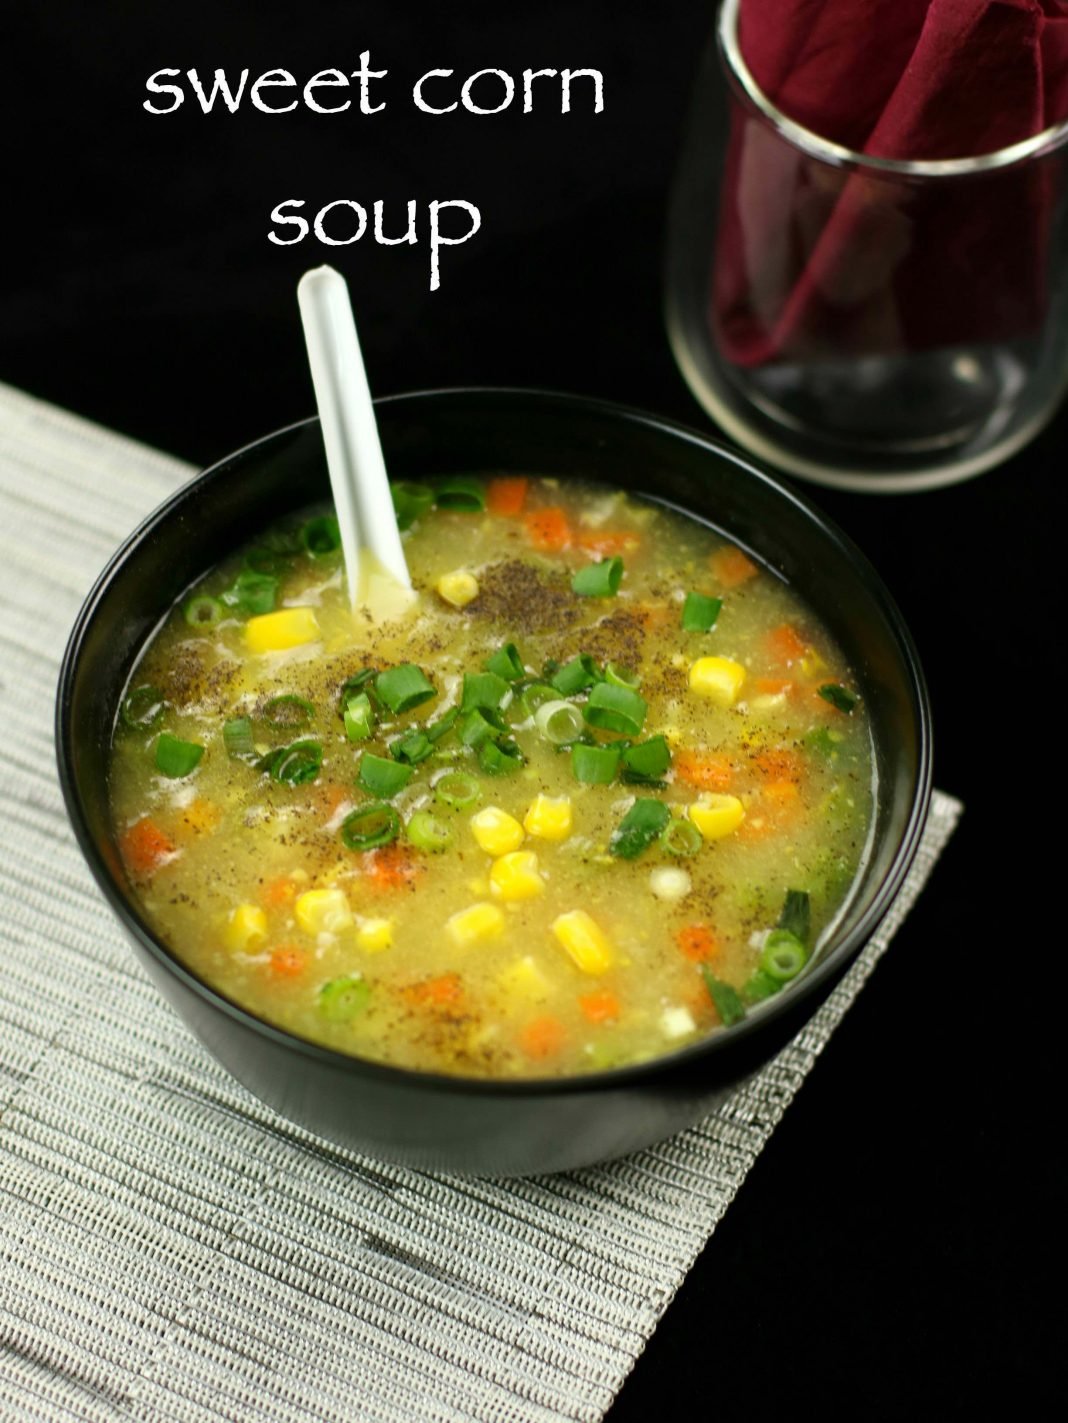 sweet corn soup recipe | sweet corn and vegetable soup recipe